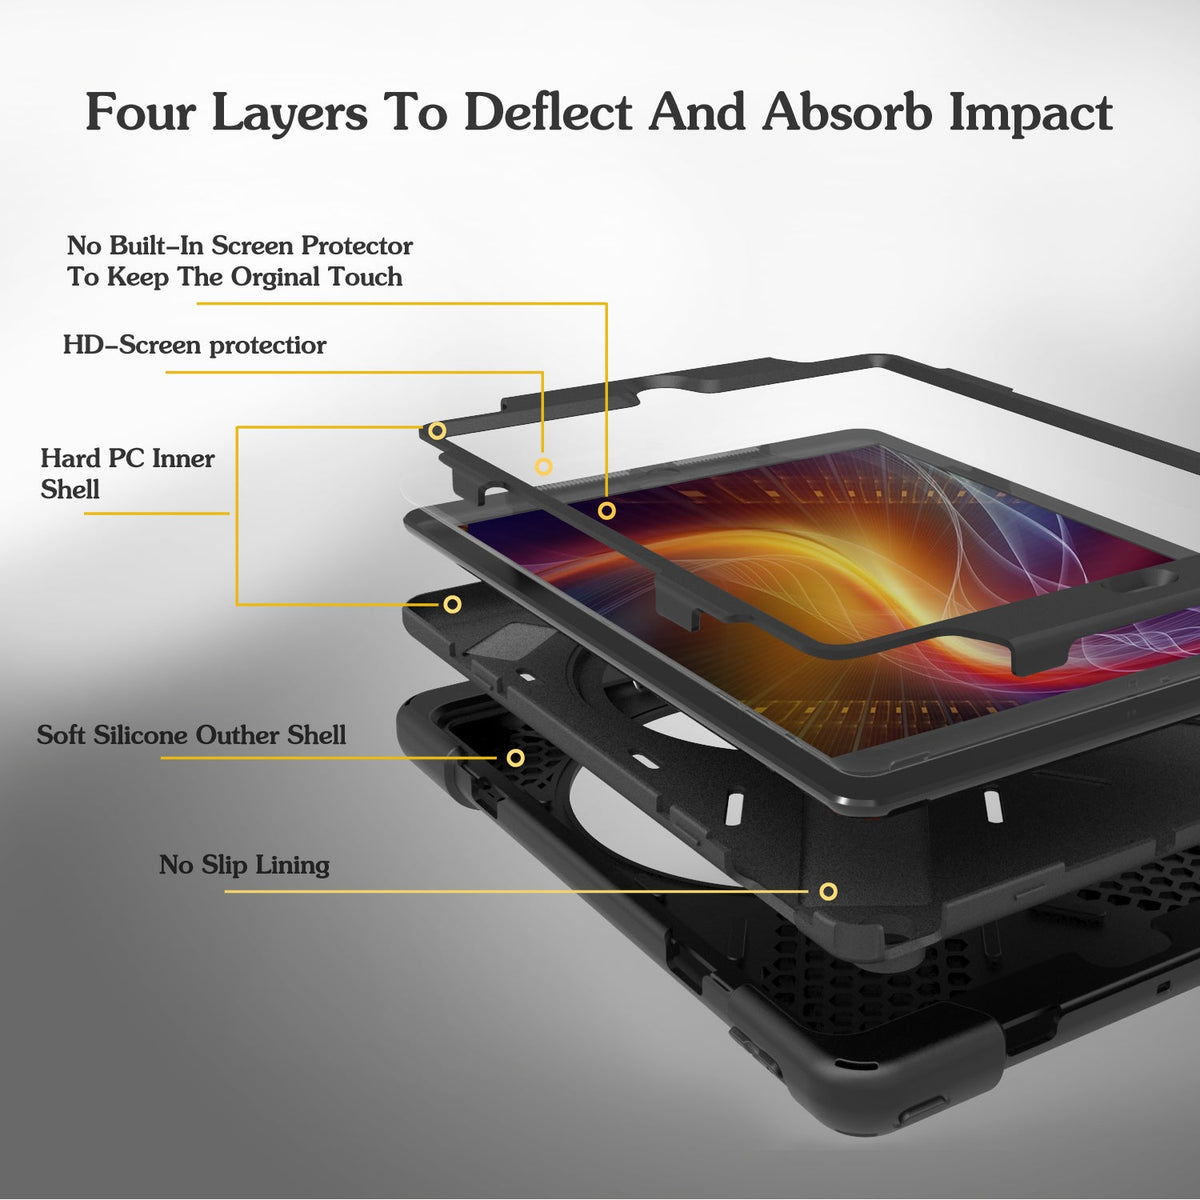 iPad Case with 360 Degree Rotating Kickstand (Clearance)